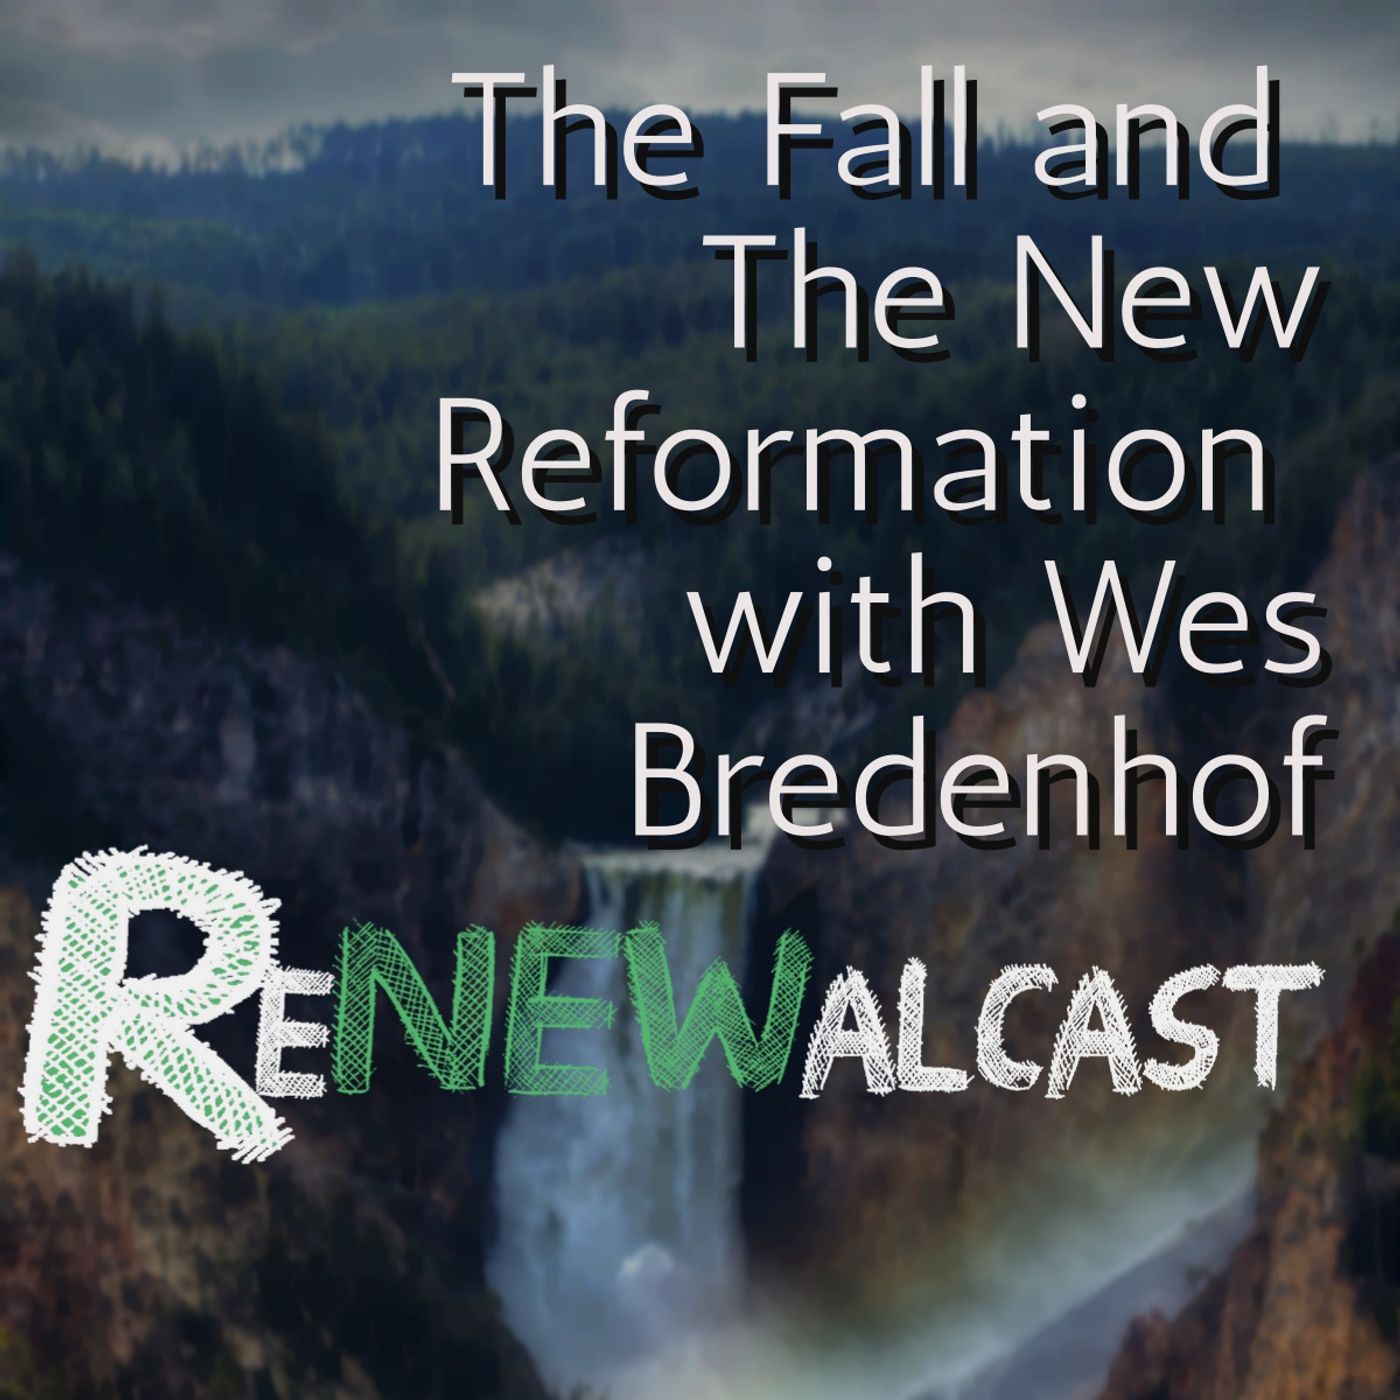 The Fall and  The New Reformation  with Wes Bredenhof